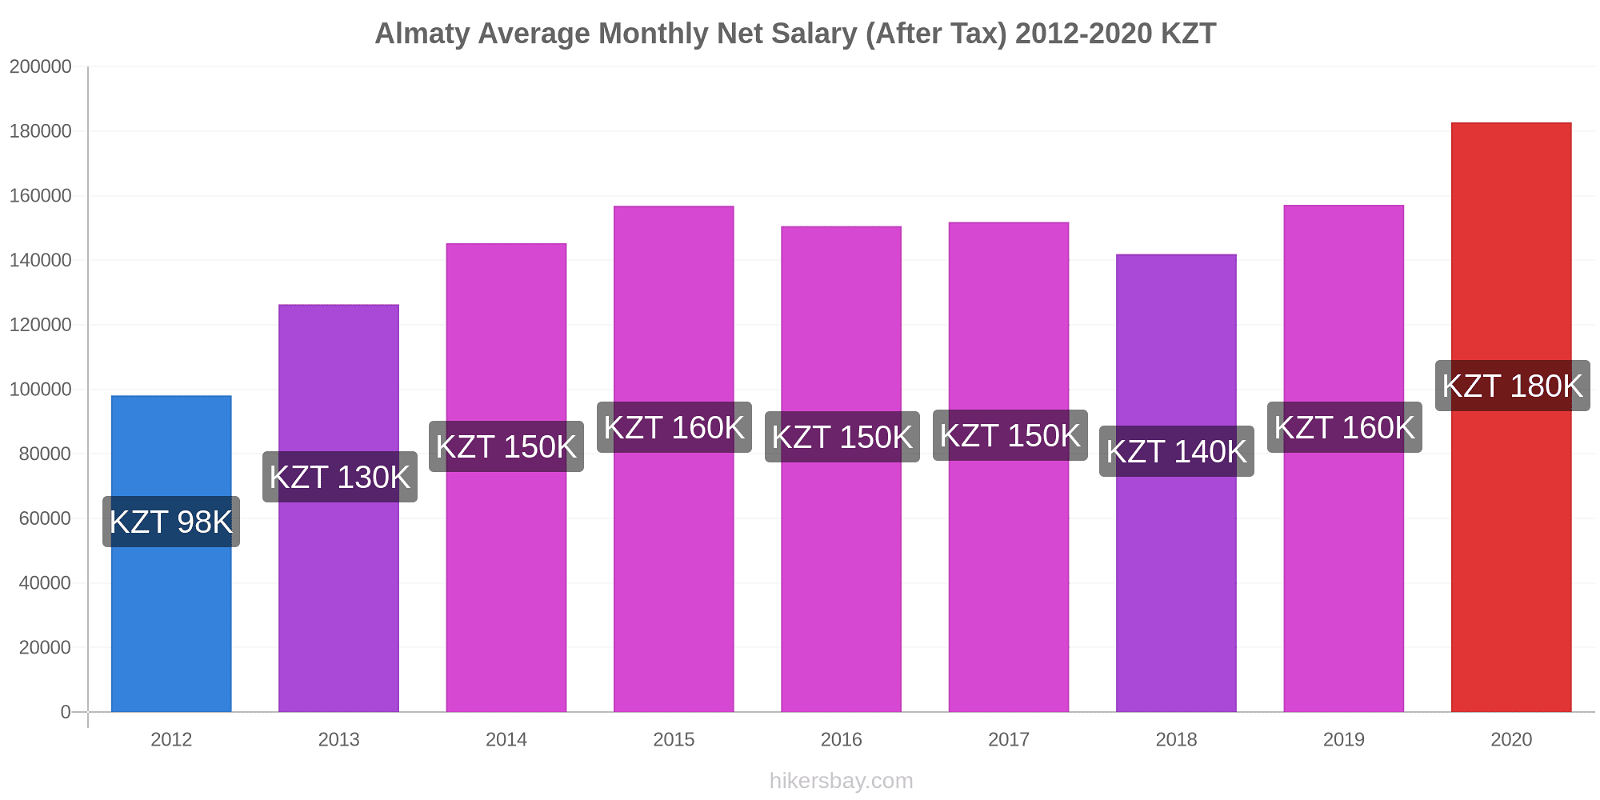 Almaty price changes Average Monthly Net Salary (After Tax) hikersbay.com